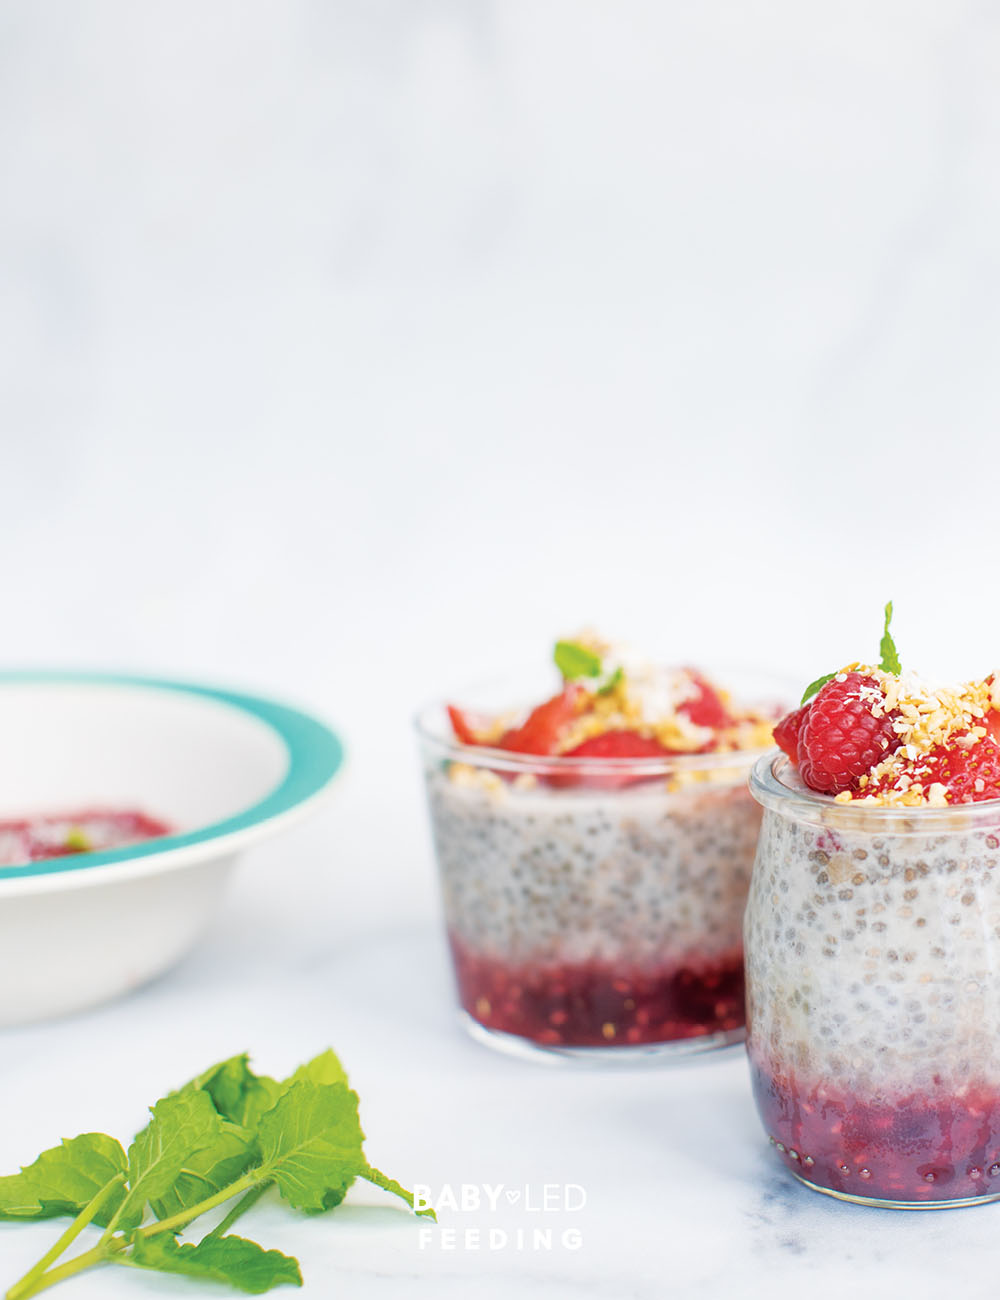 How to give your Baby Chia - Chia Pudding2